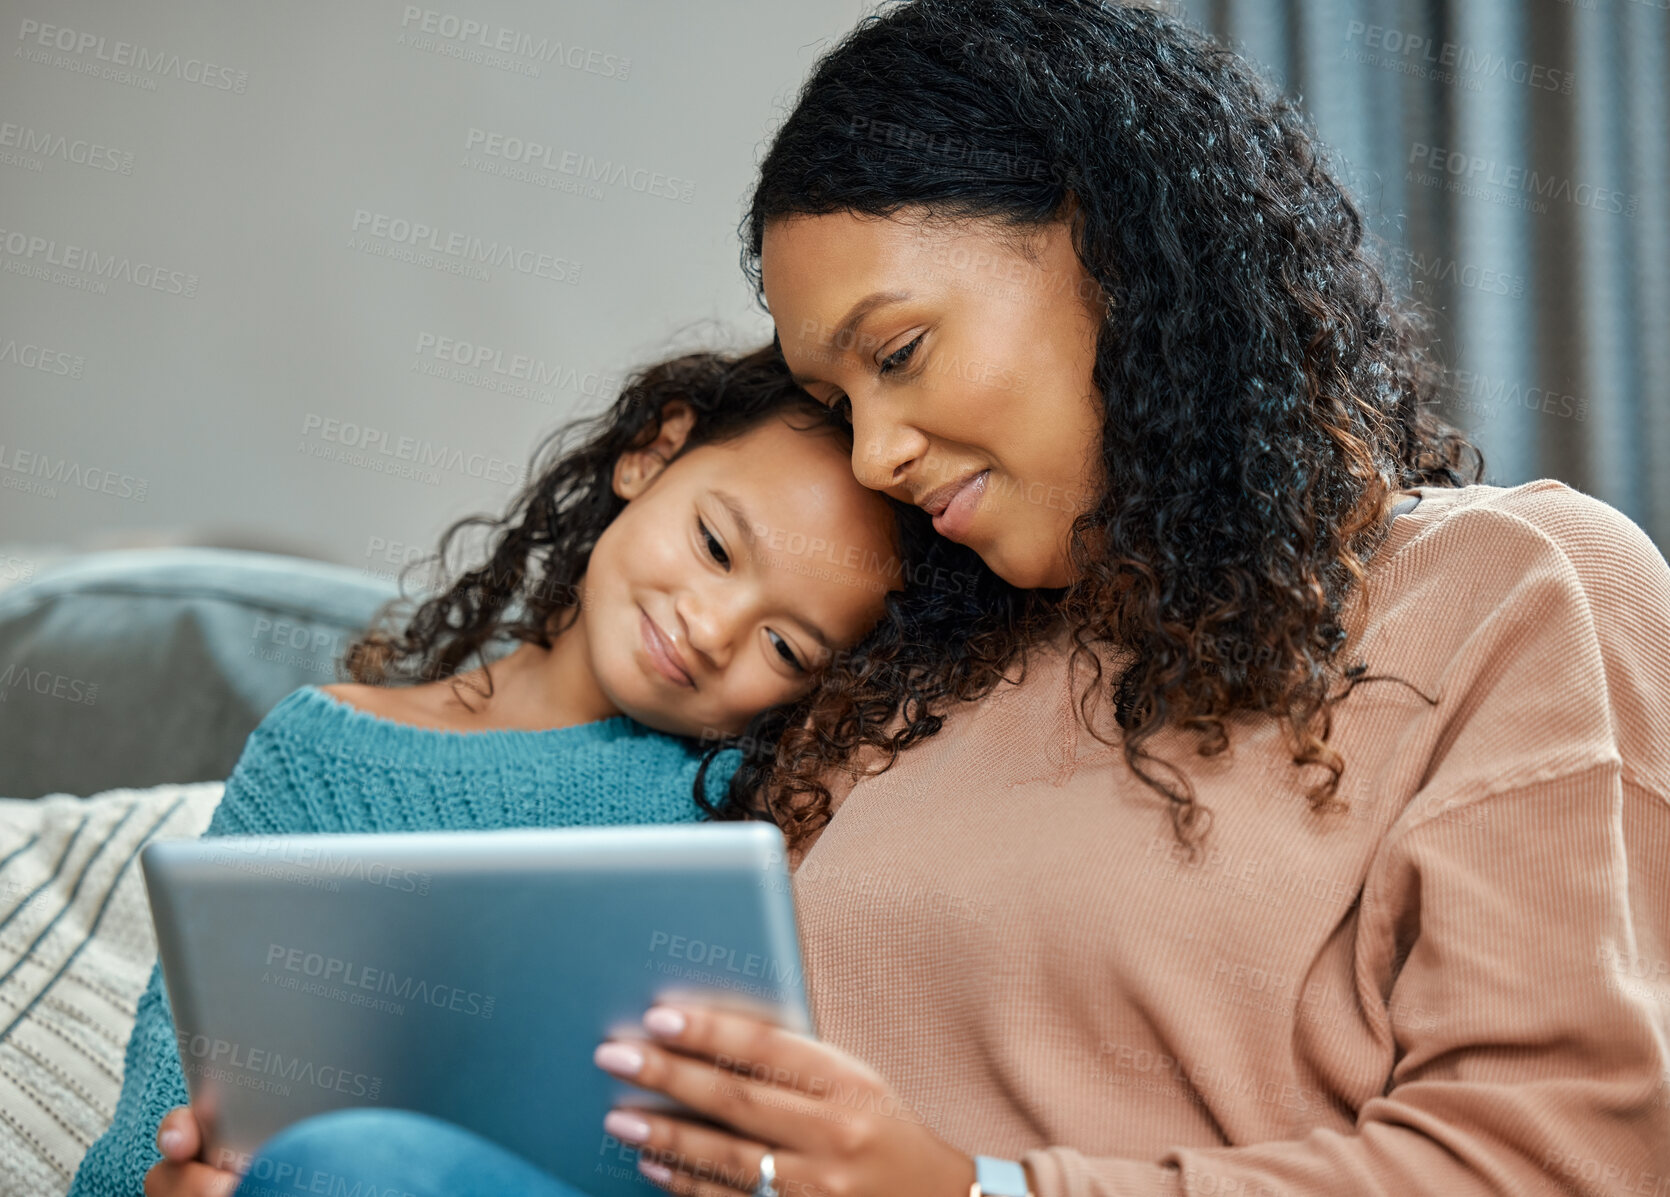 Buy stock photo Shot of an attractive young woman sitting and bonding with her daughter while using a digital tablet